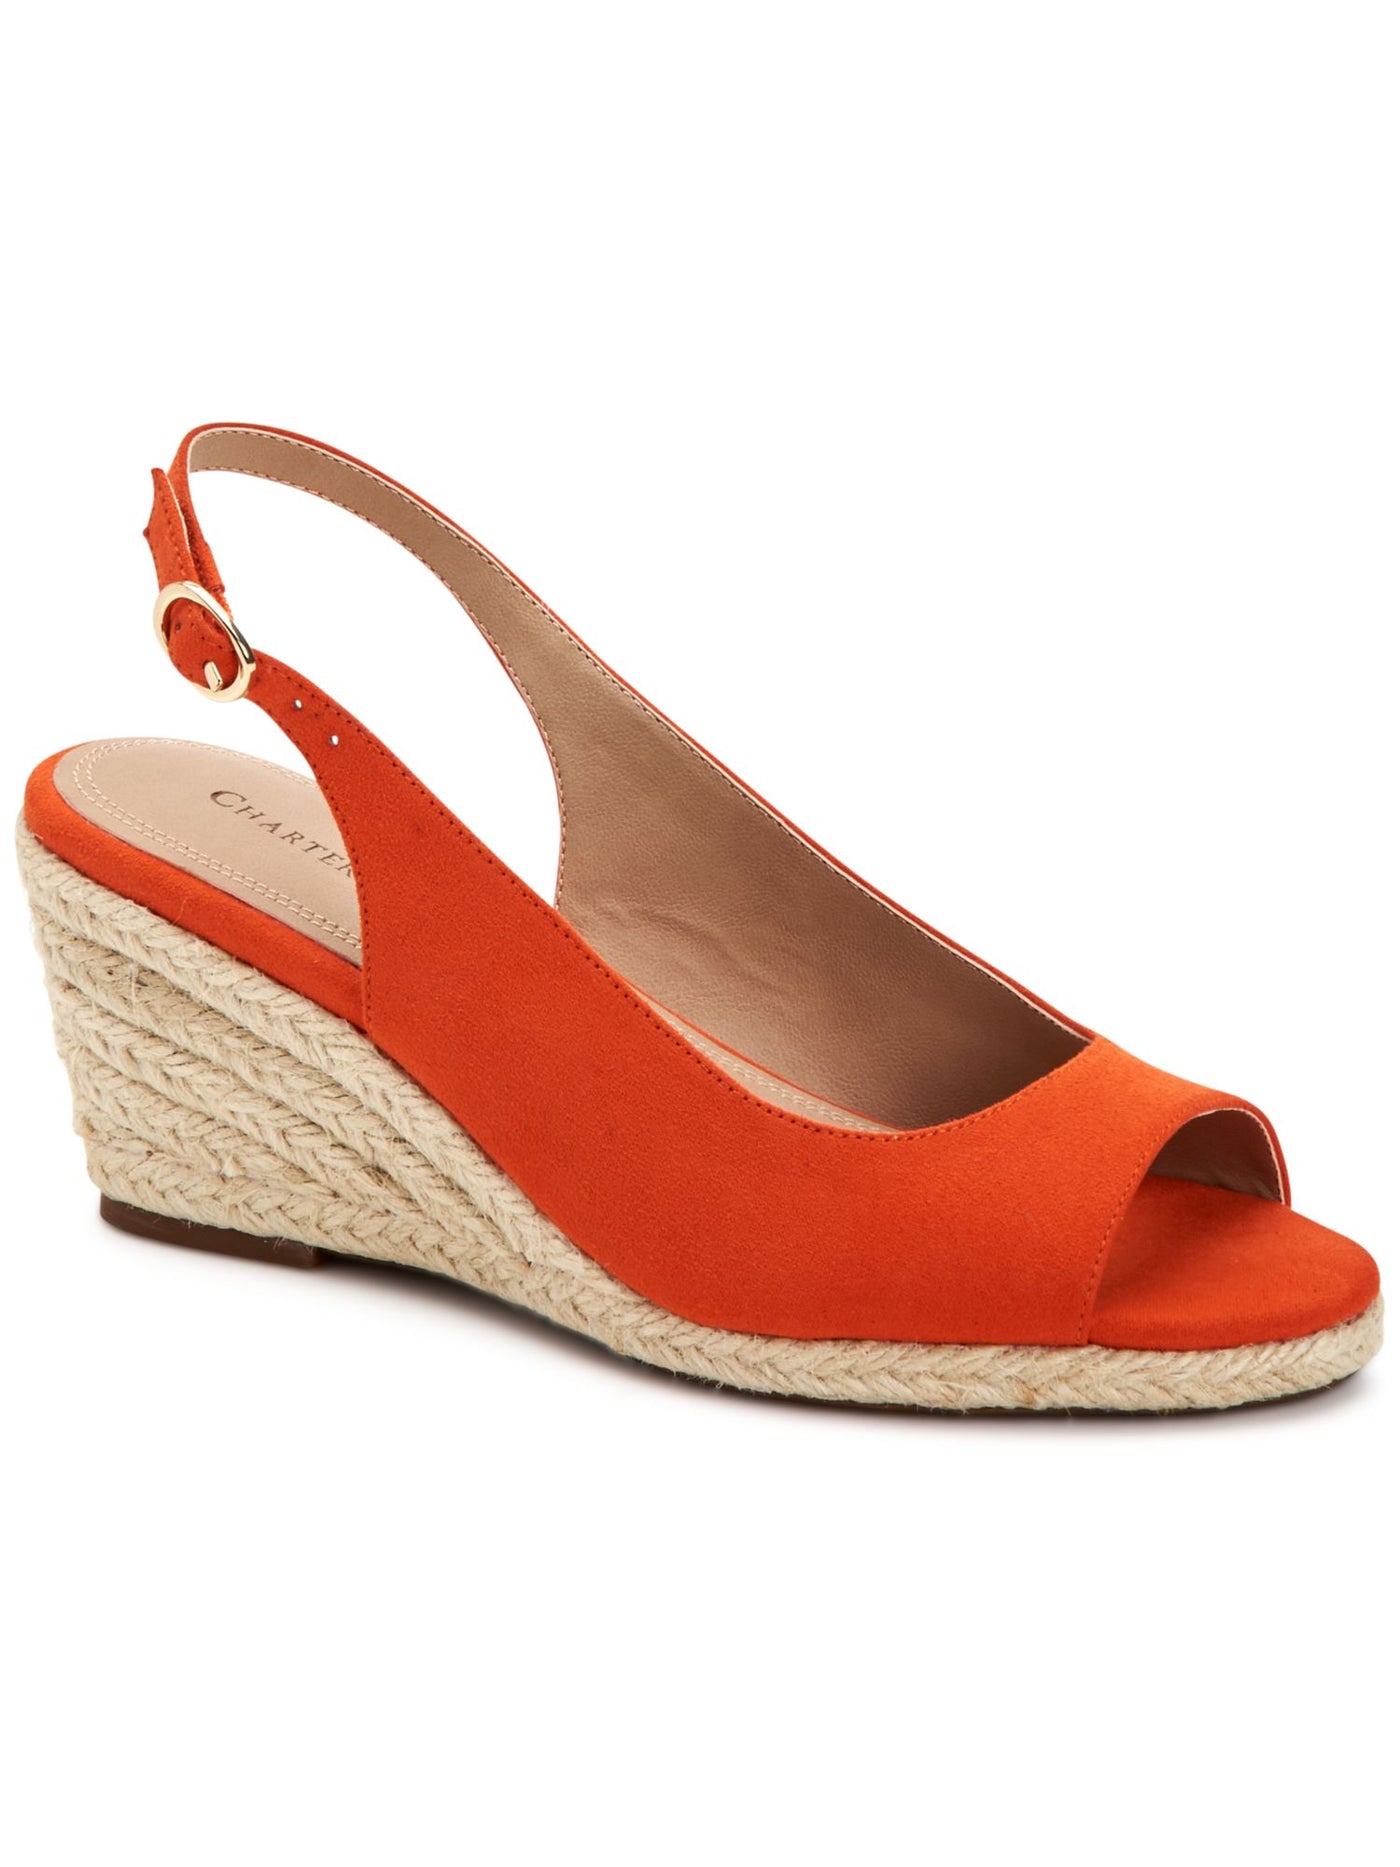 CHARTER CLUB Womens Orange Padded Ankle Strap Tamaare Round Toe Wedge Buckle Espadrille Shoes 6.5 M